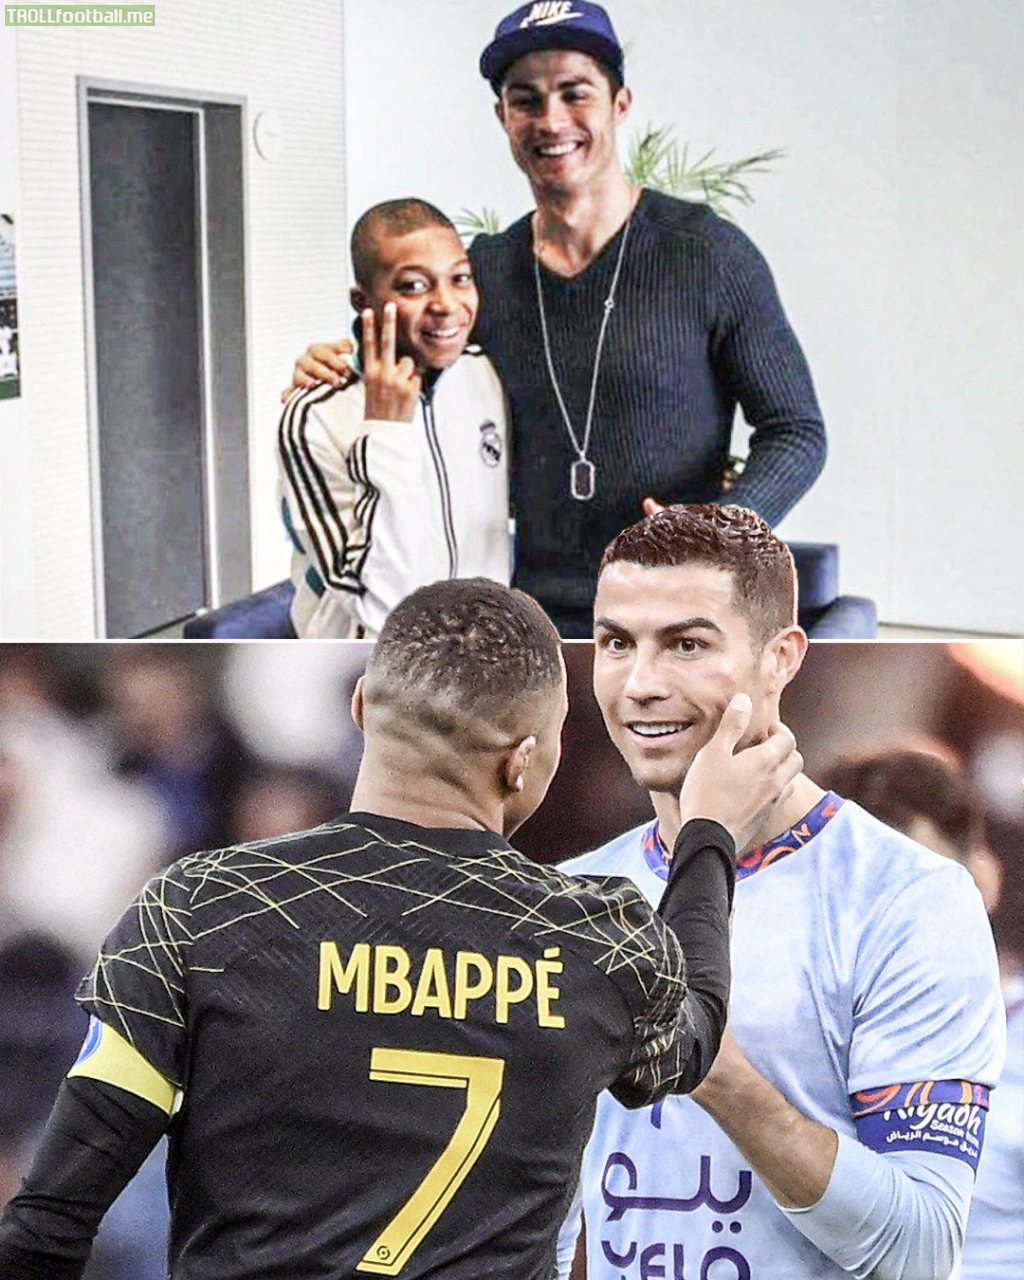 Mbappé & Cristiano back then and now